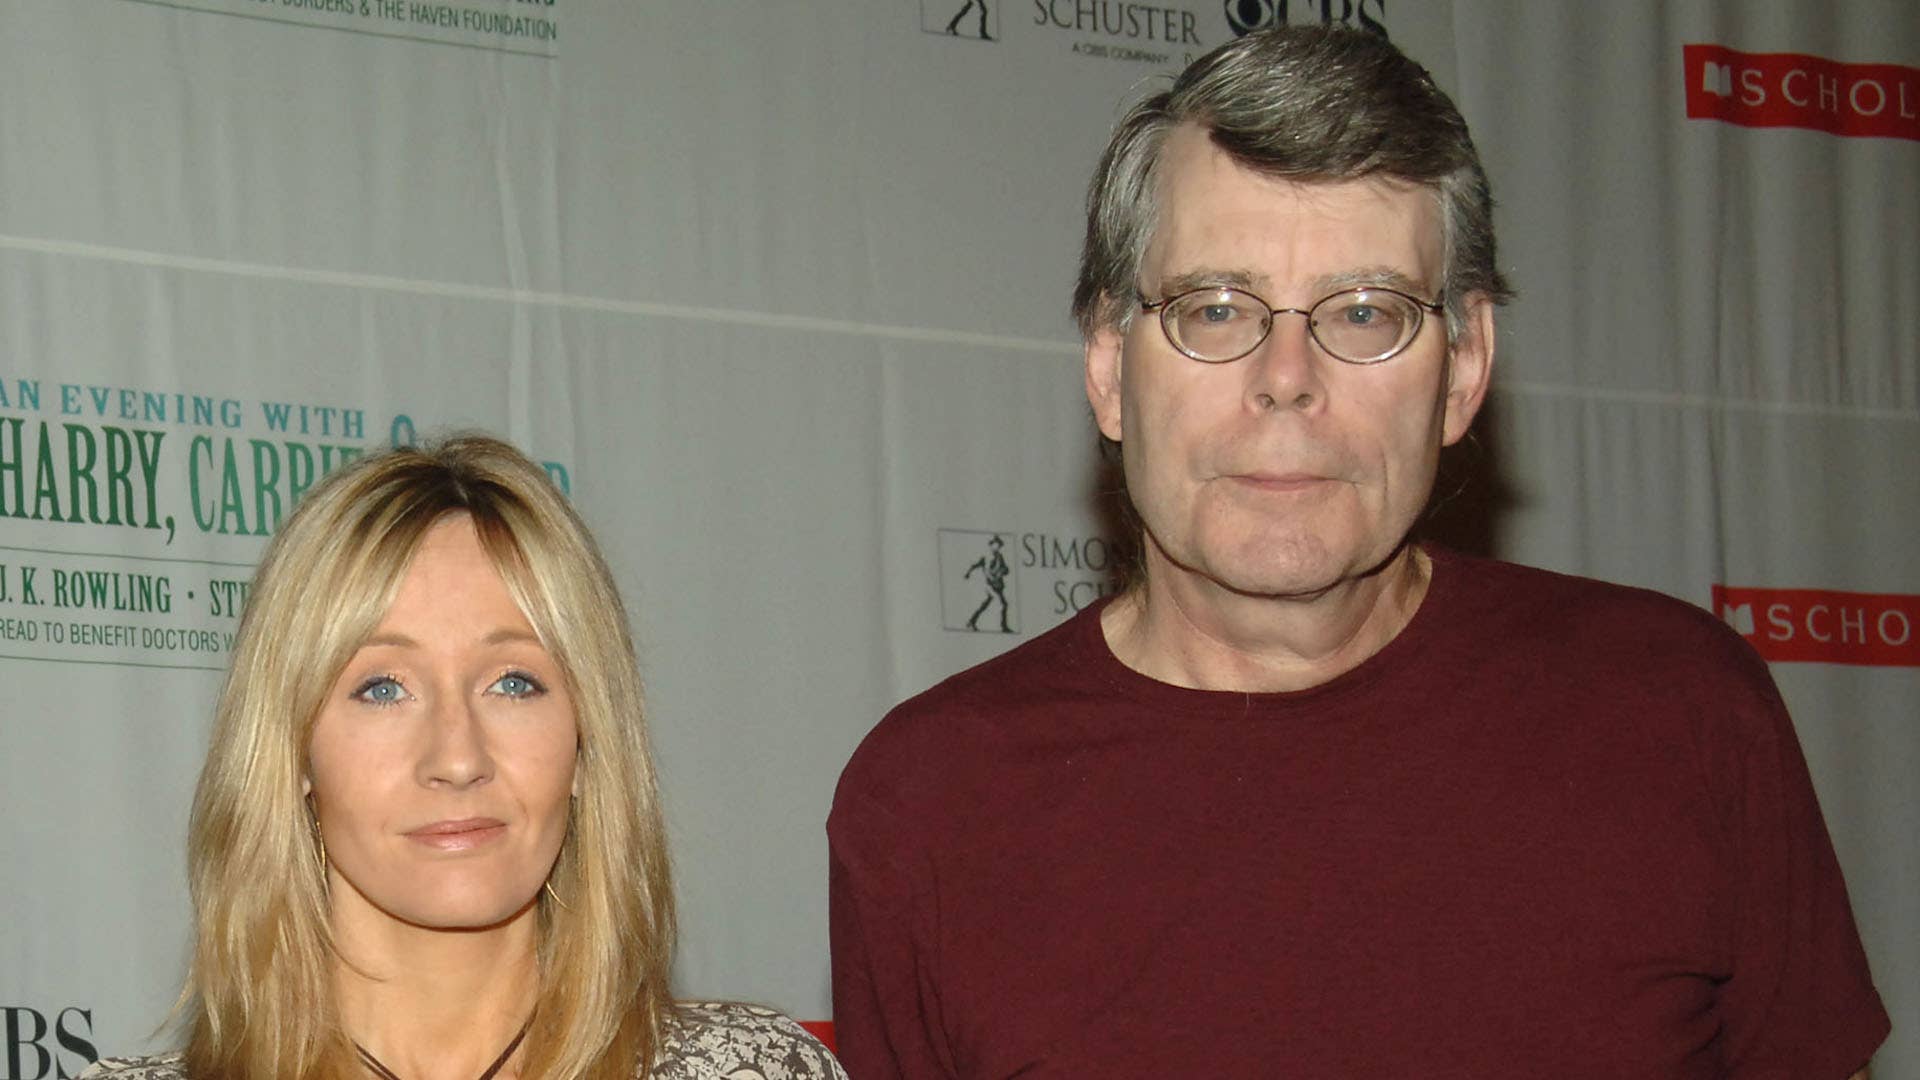 J.K. Rowling and Stephen King at "Harry, Carrie and Garp" press conference.